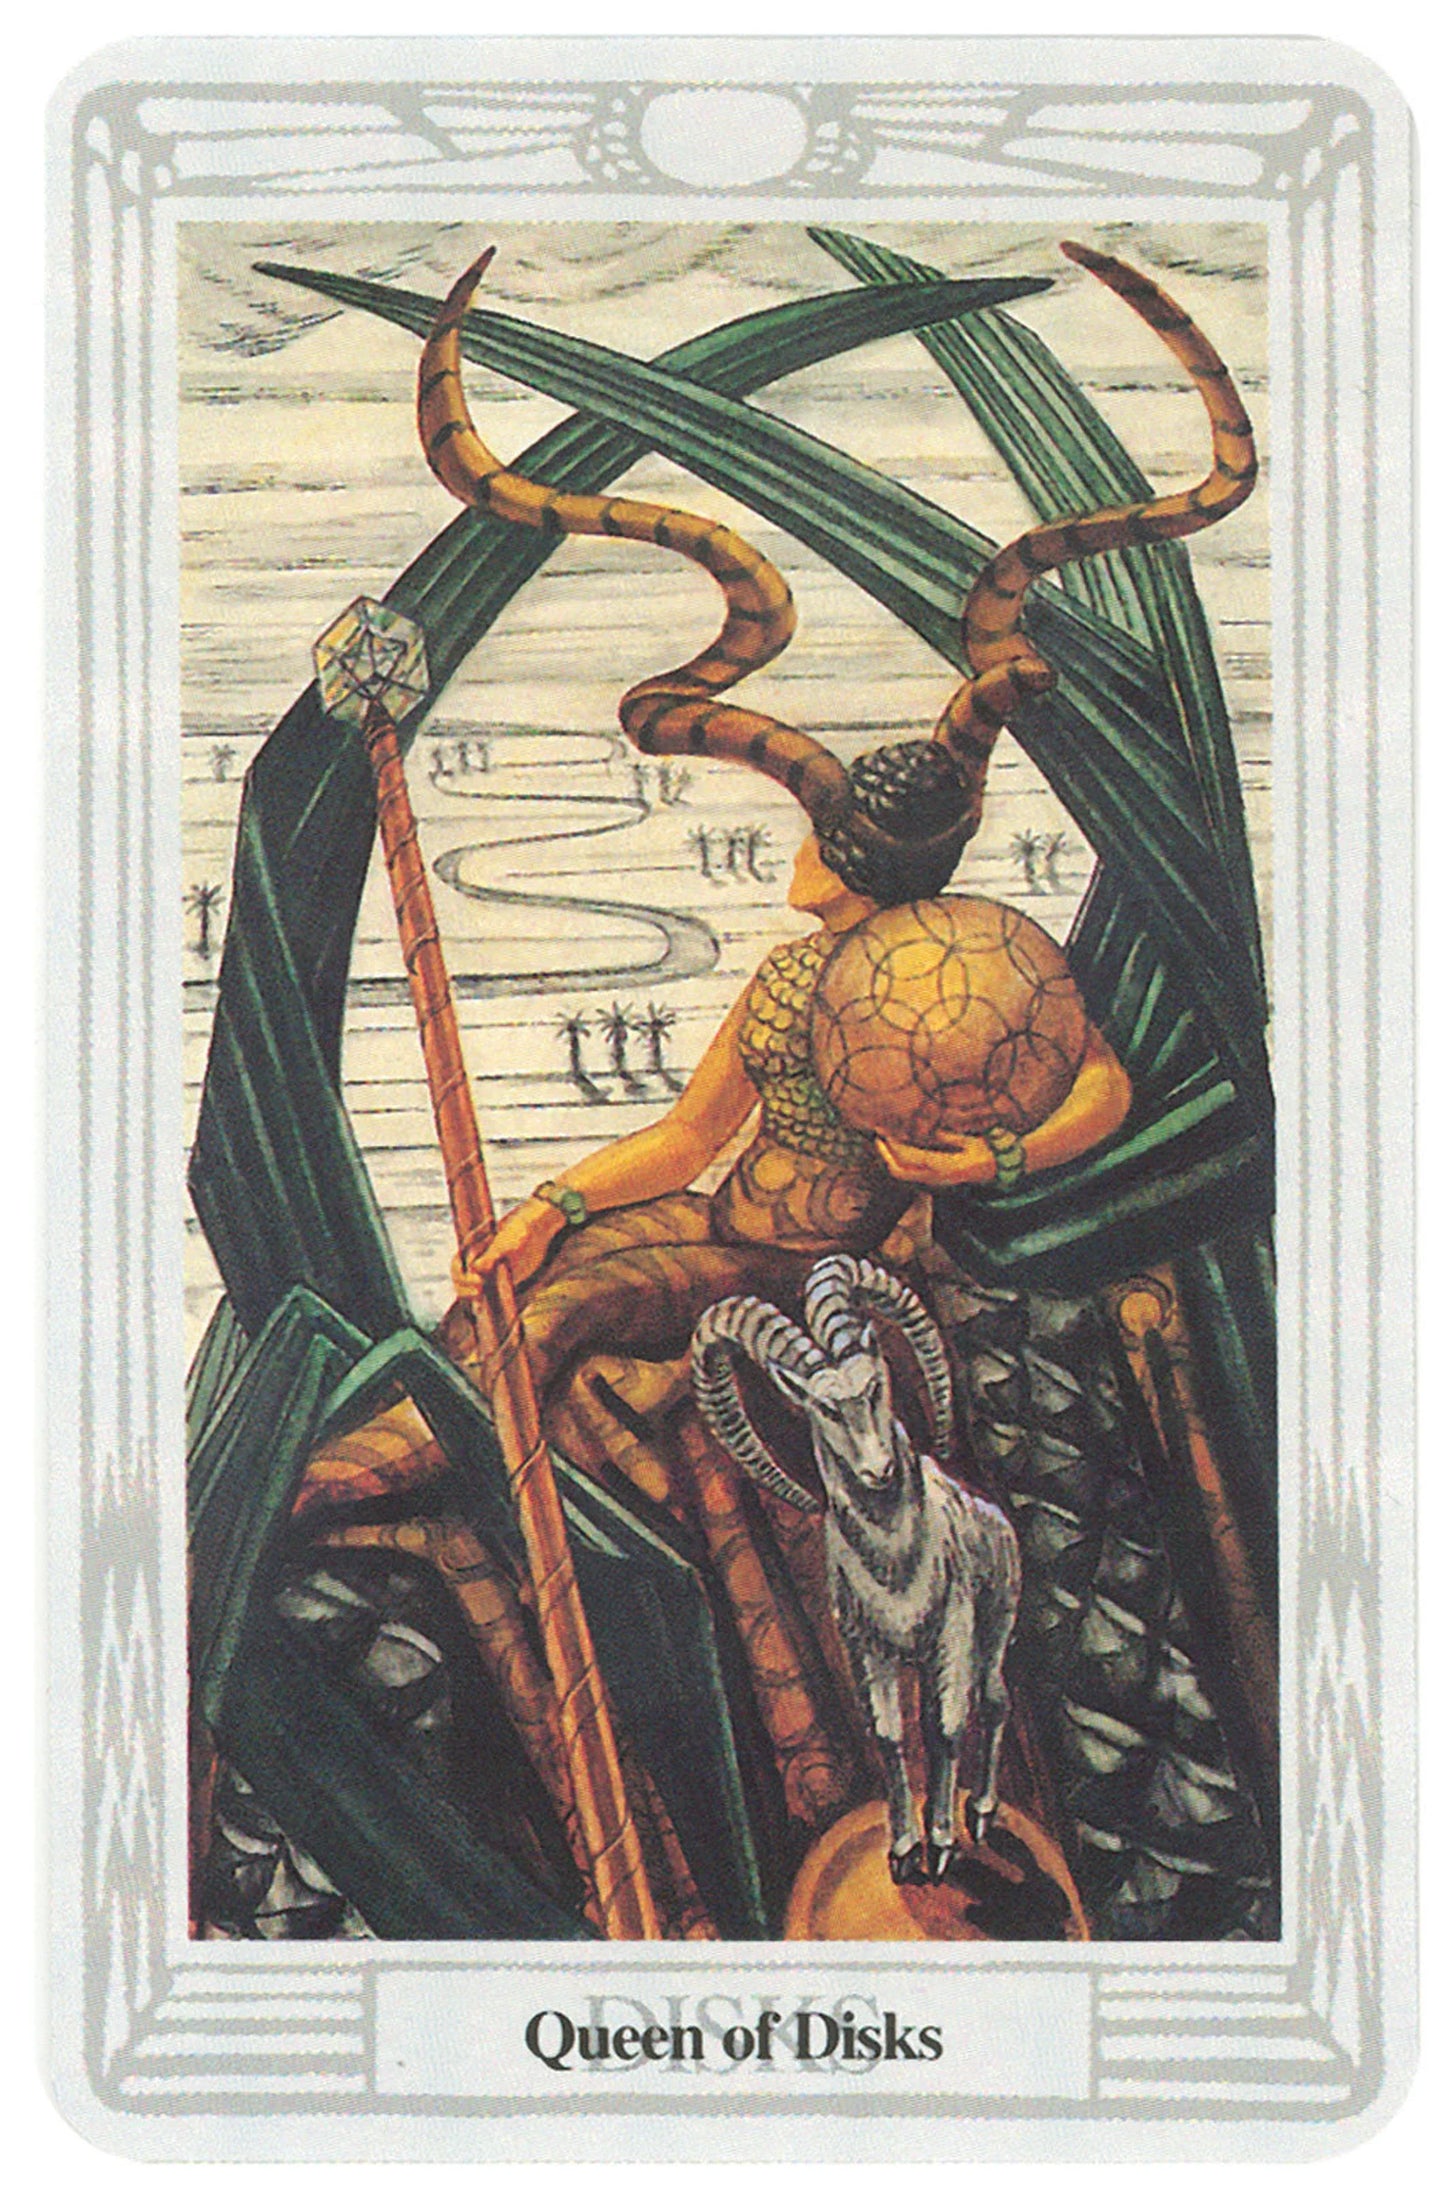 Aleister Crowley Thoth Tarot Deck - Premier Edition